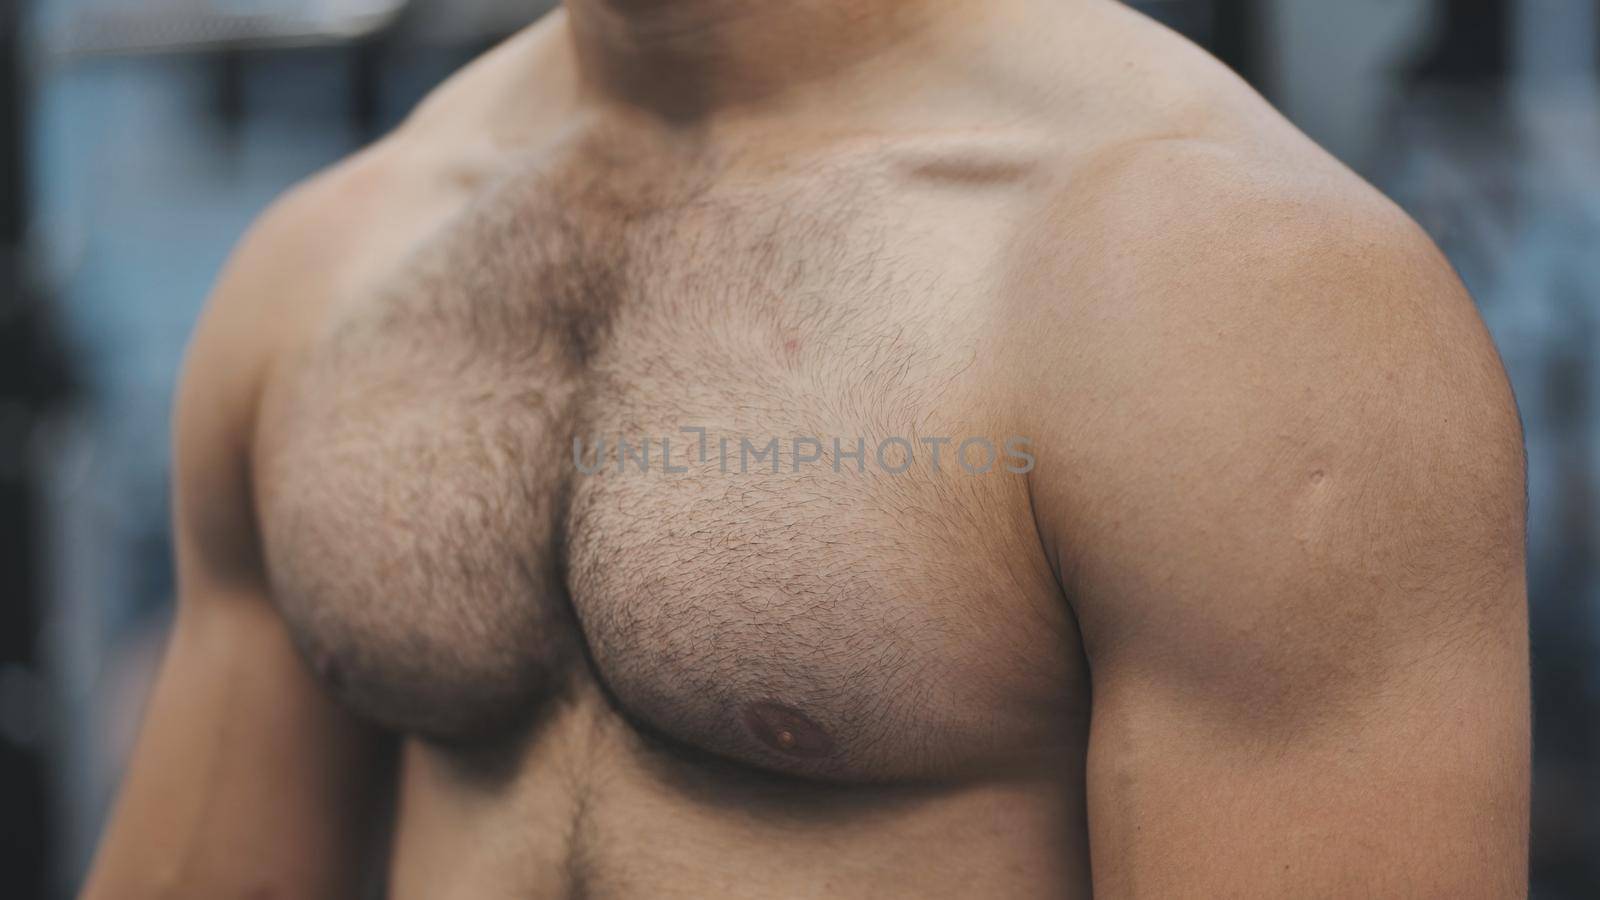 A man moves his strong and muscular chest.